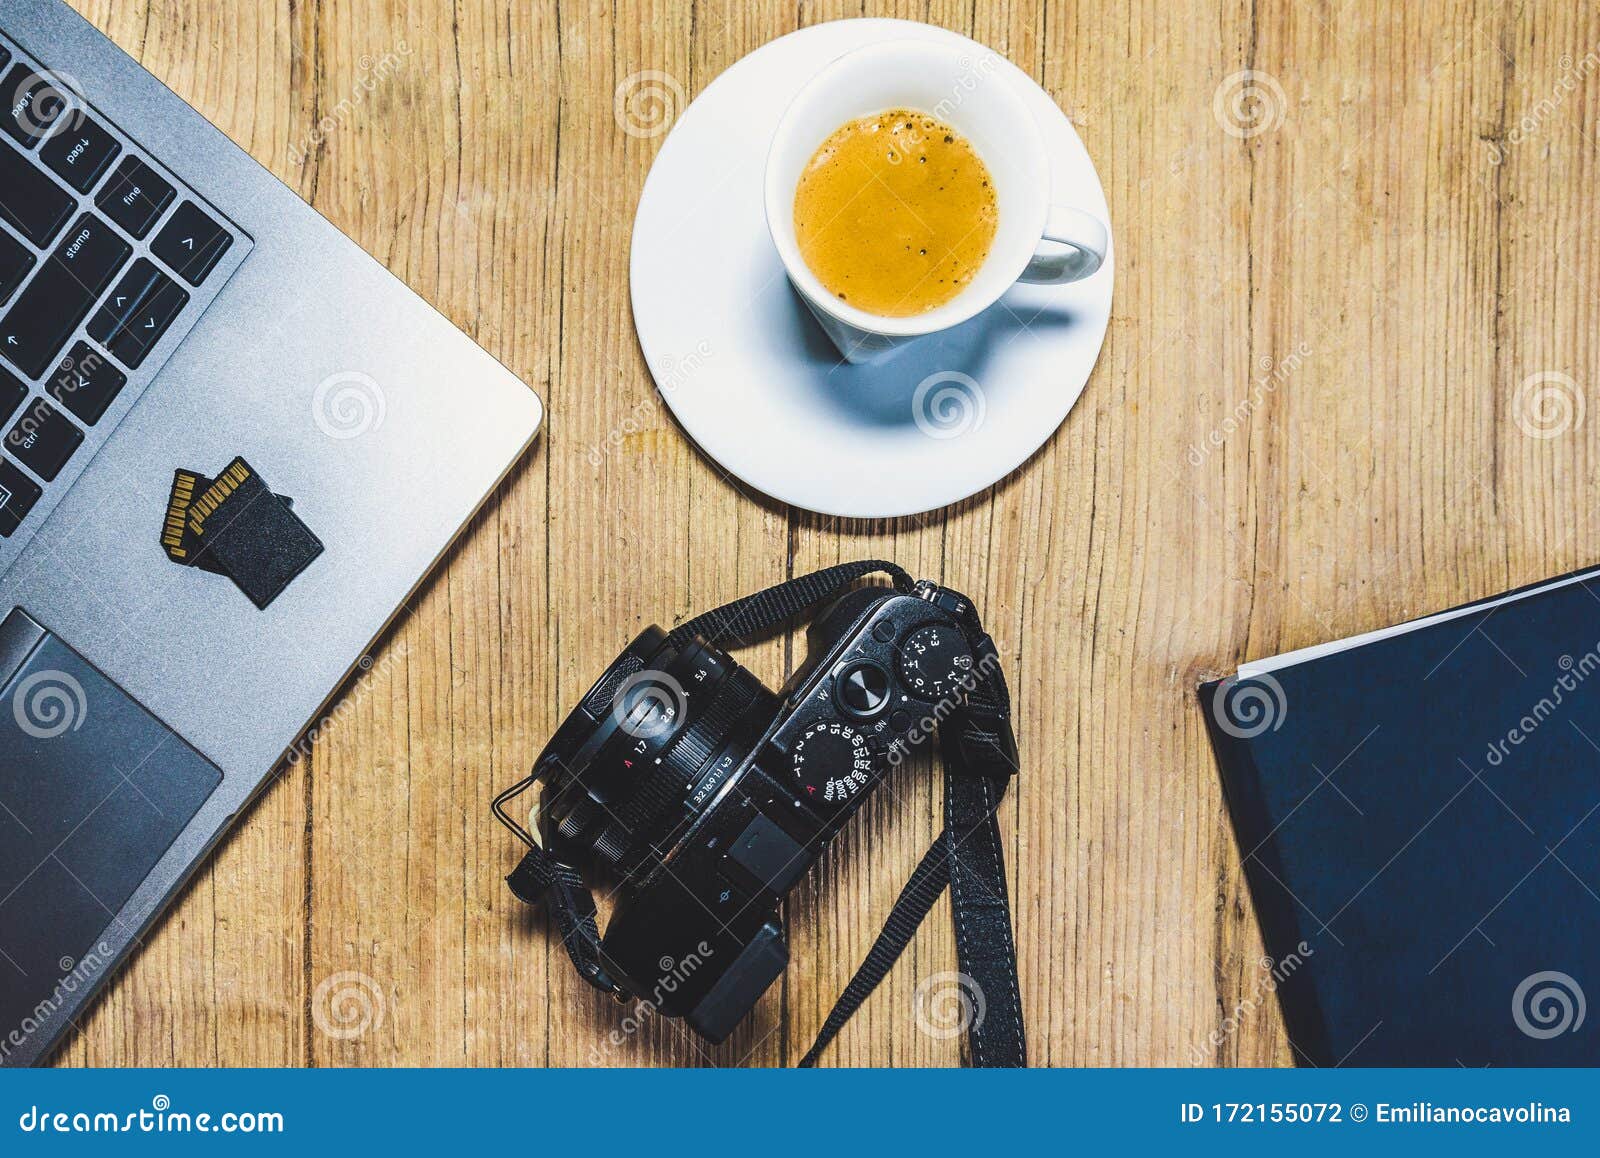 wooden desk table with camera, laptop, memory cards, espresso cup and clipboard.